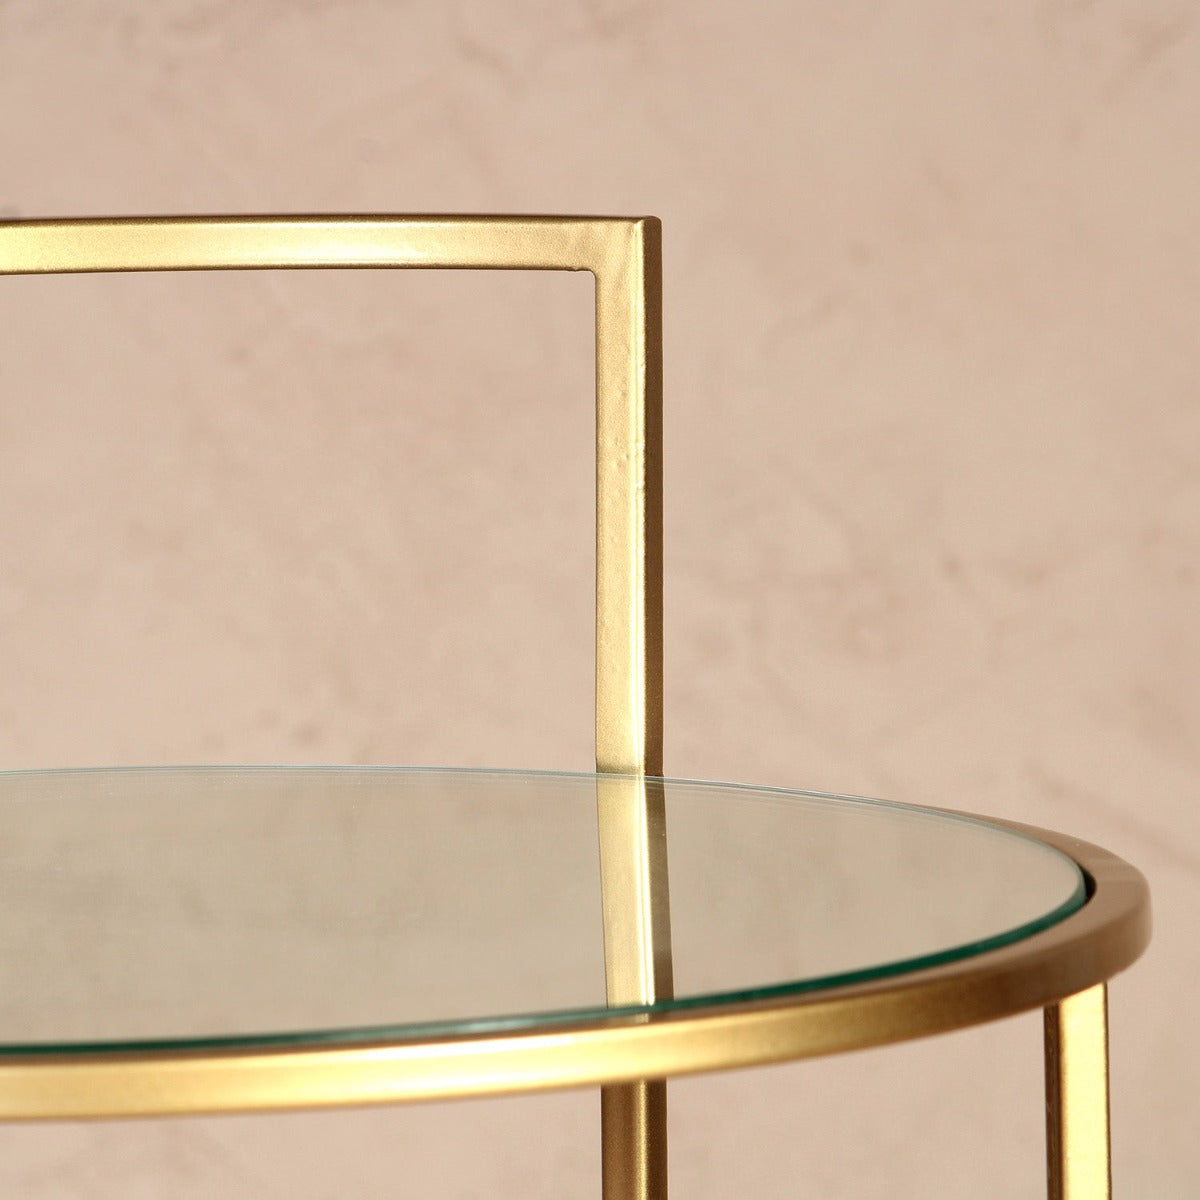 Jamina Glass Side Table In Gold Finish